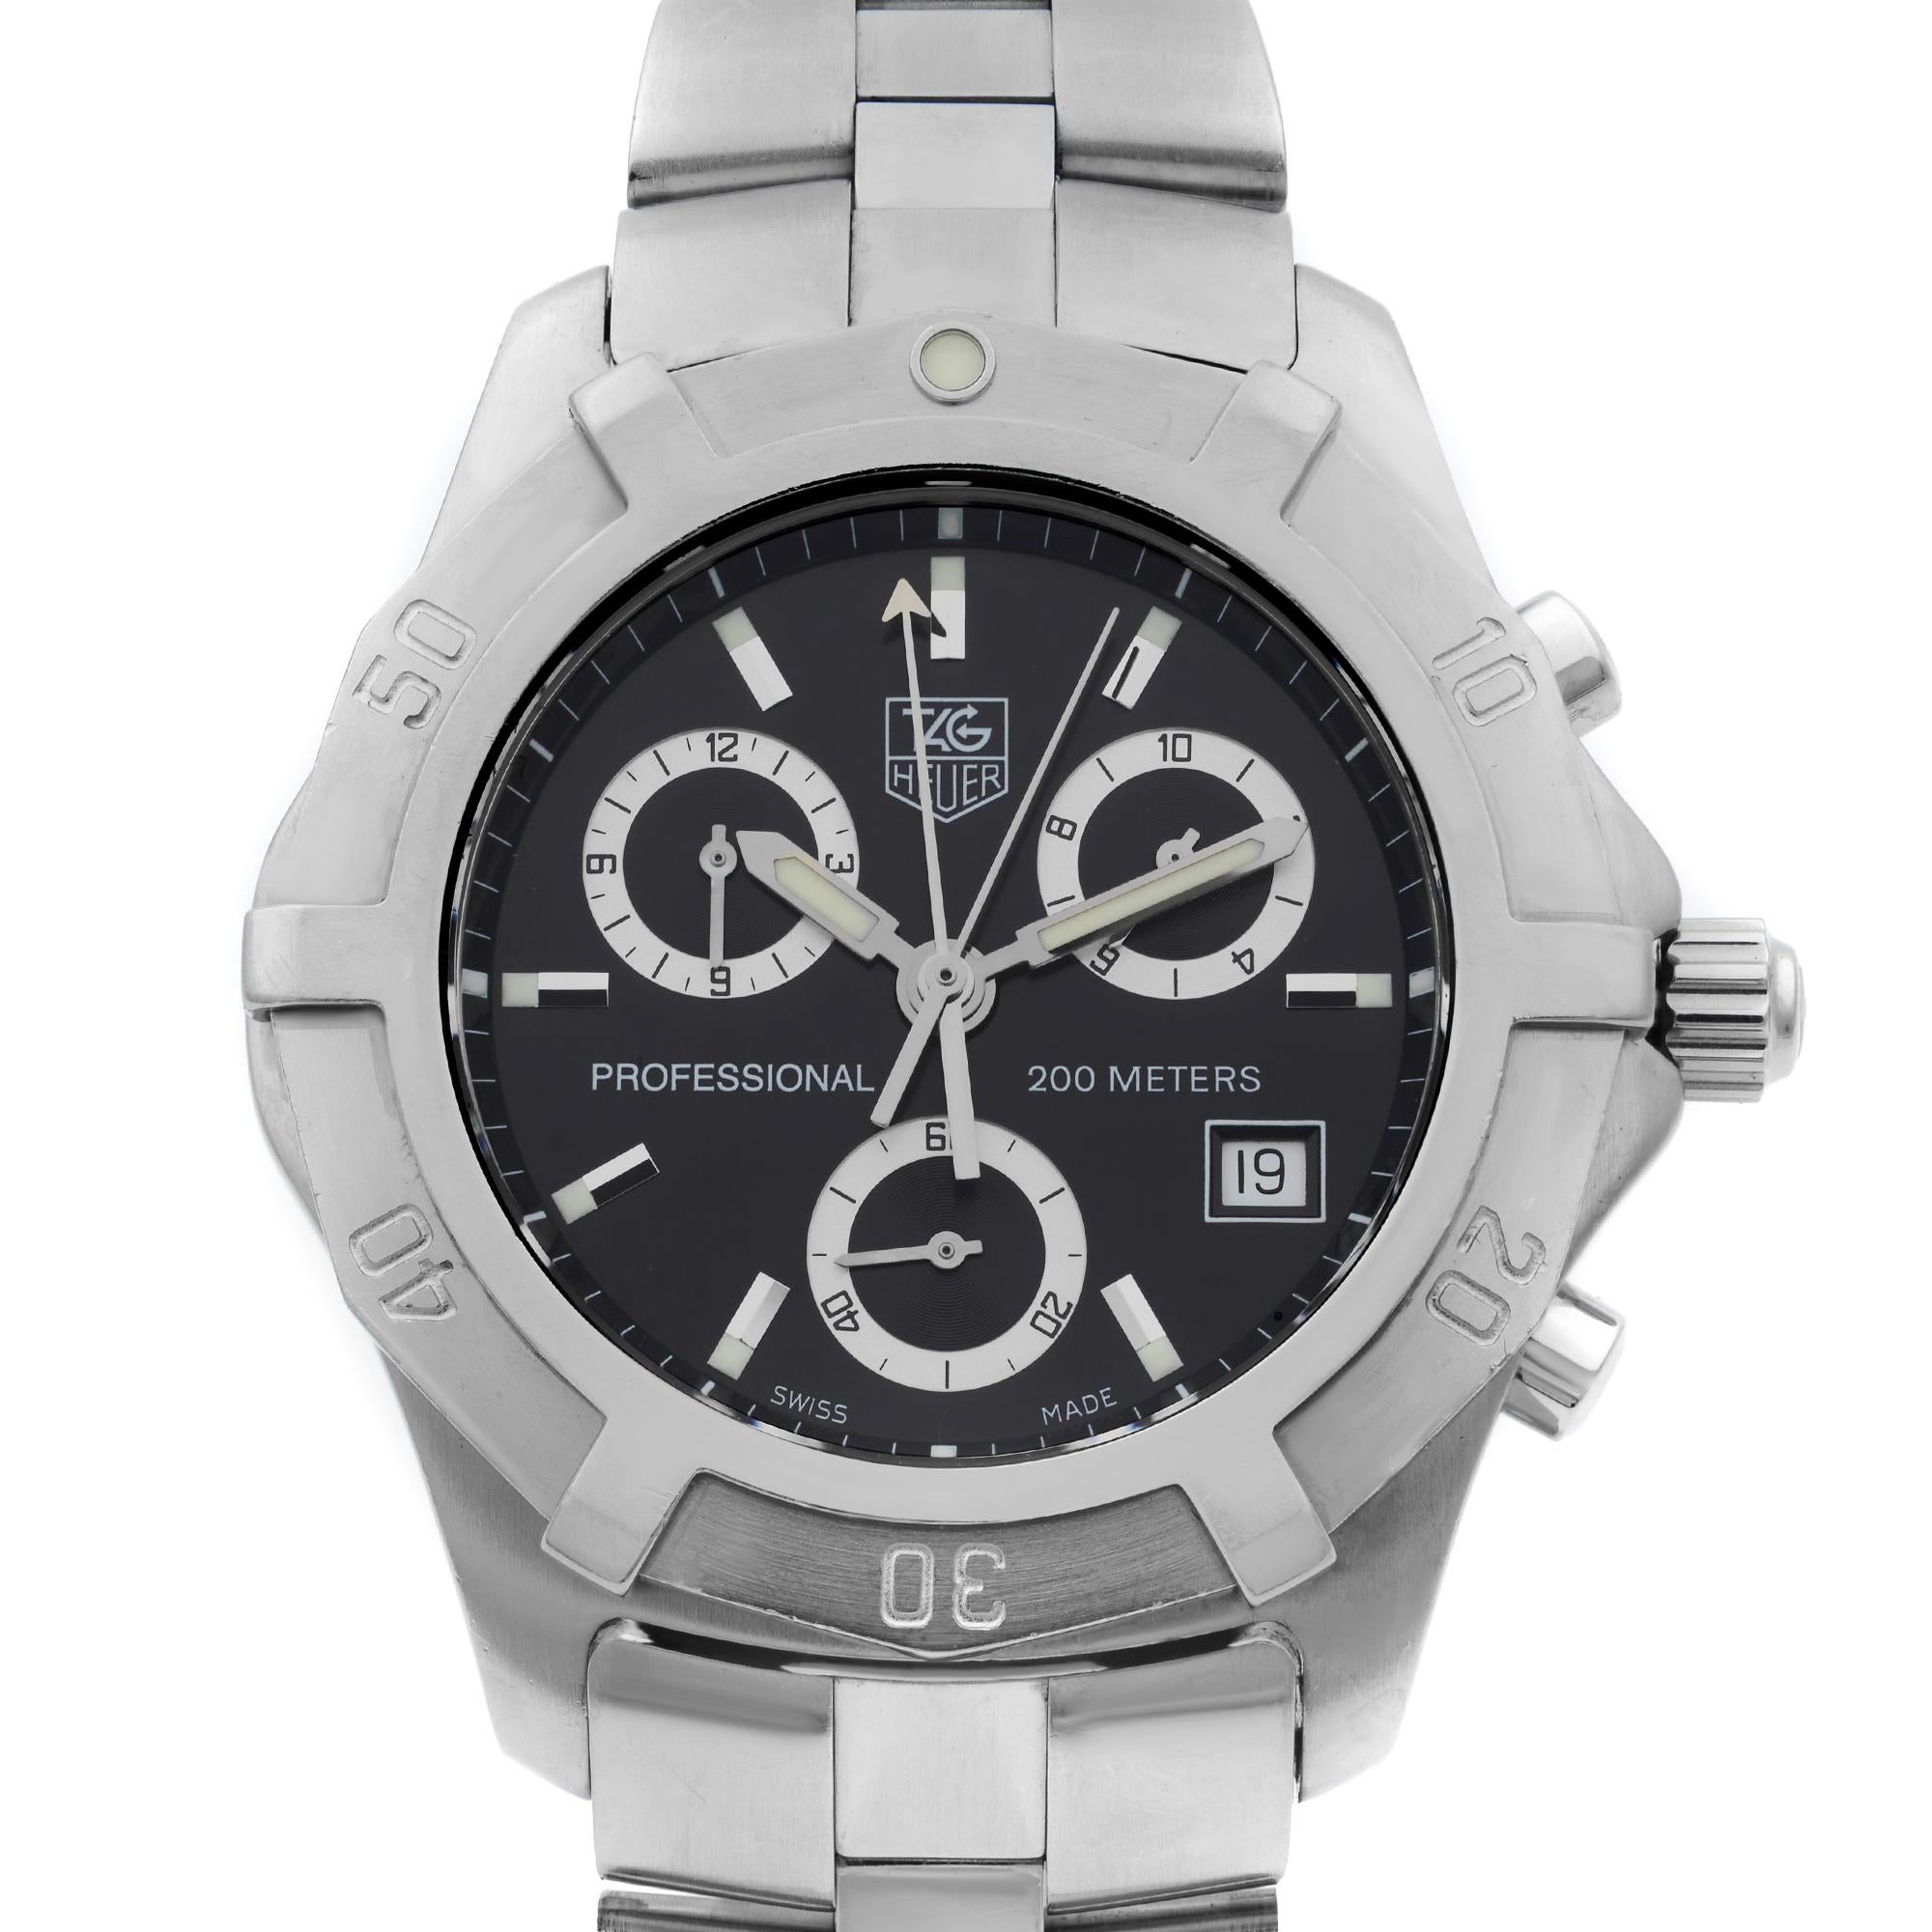 This pre-owned TAG Heuer Professional 2000 CN111F.BA0337 is a beautiful men's timepiece that is powered by quartz (battery) movement which is cased in a stainless steel case. It has a round shape face, chronograph, date indicator, small seconds